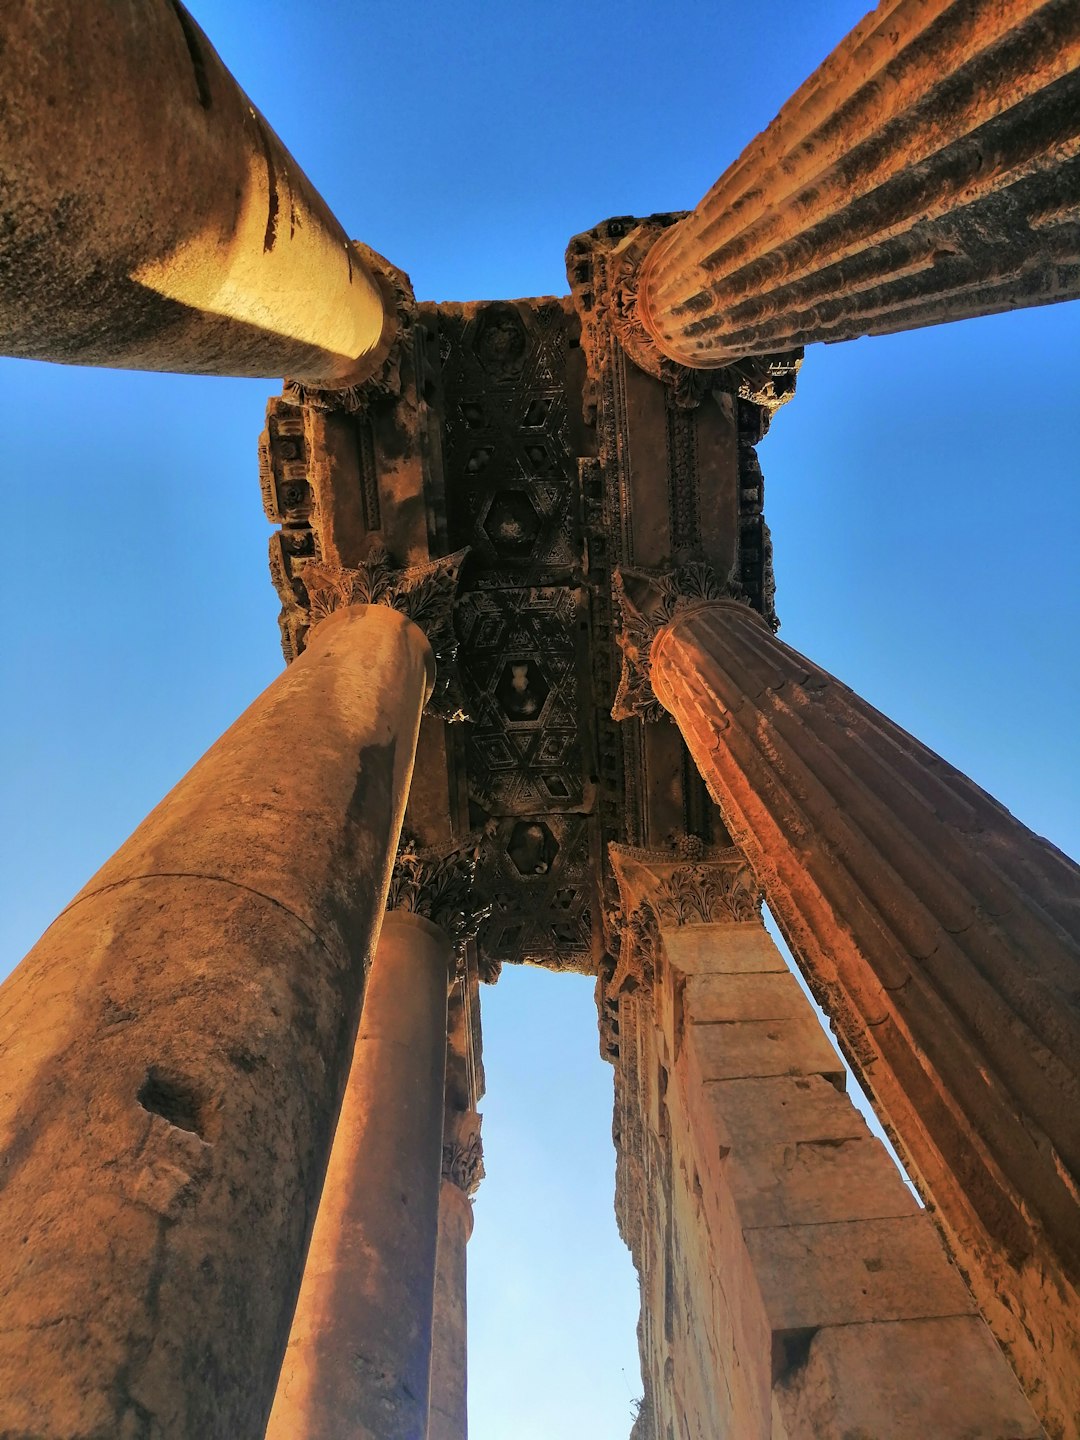 Travel Tips and Stories of Baalbeck Temple in Lebanon